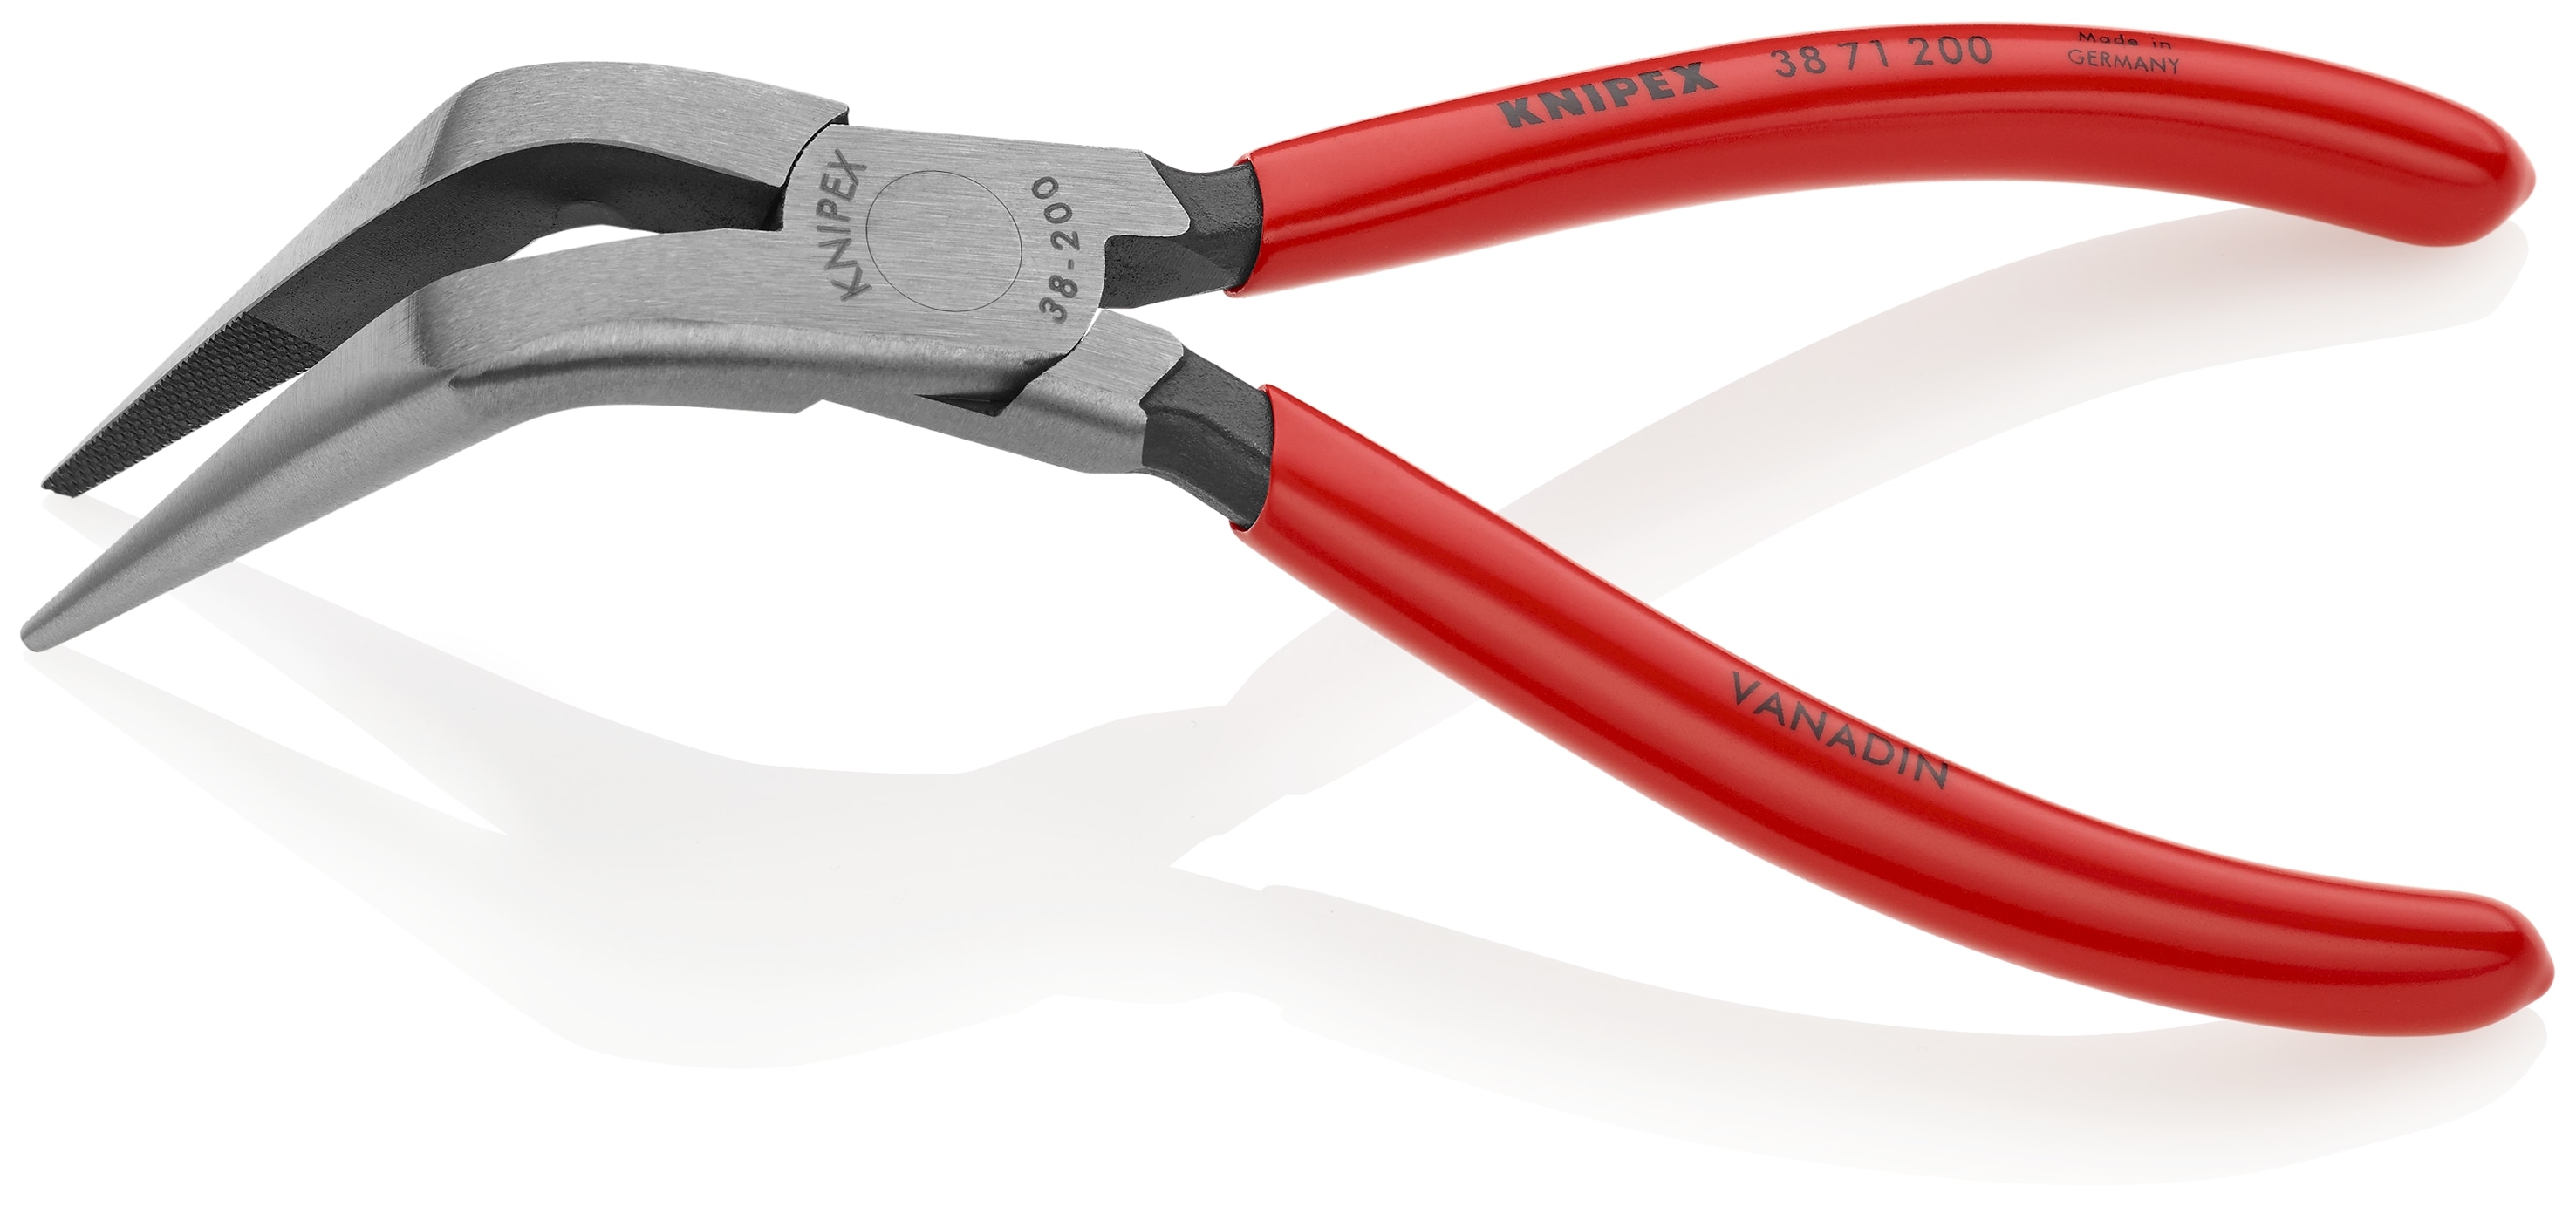 Half round nose pliers for mechanics KNIPEX 35 22 115